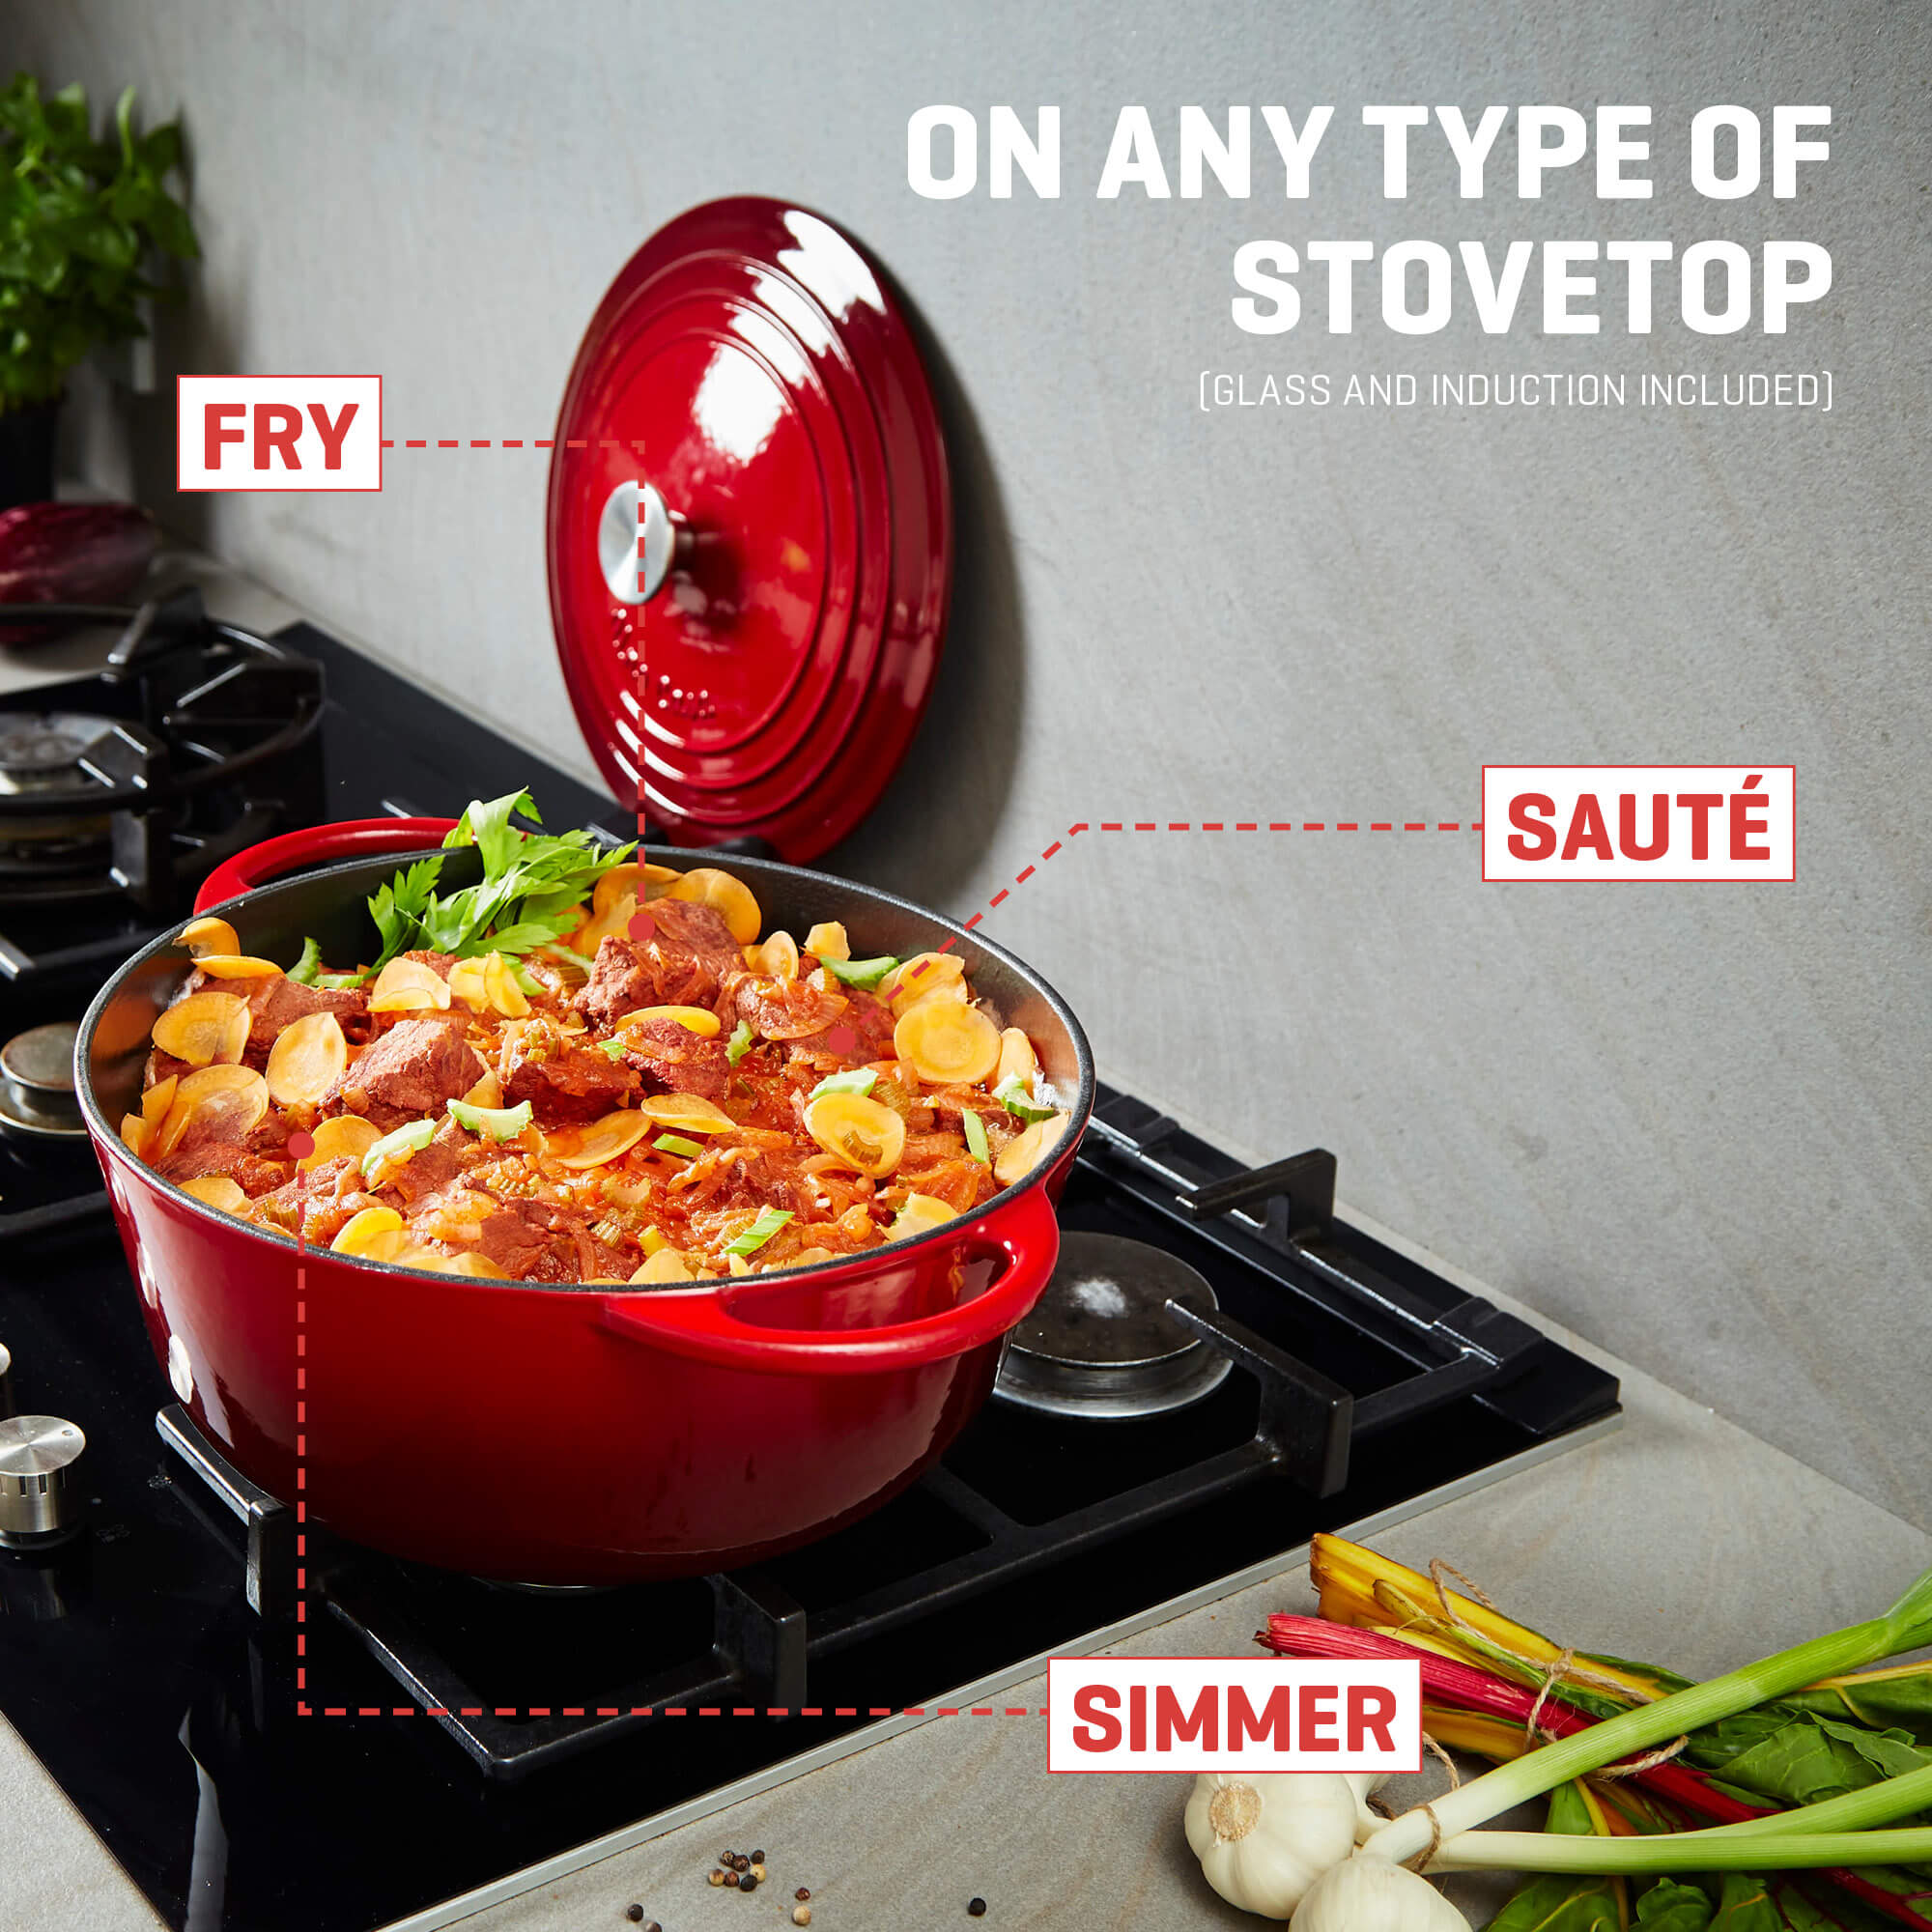 Enameled Cast Iron Dutch Oven for Every Kitchen - Uno Casa